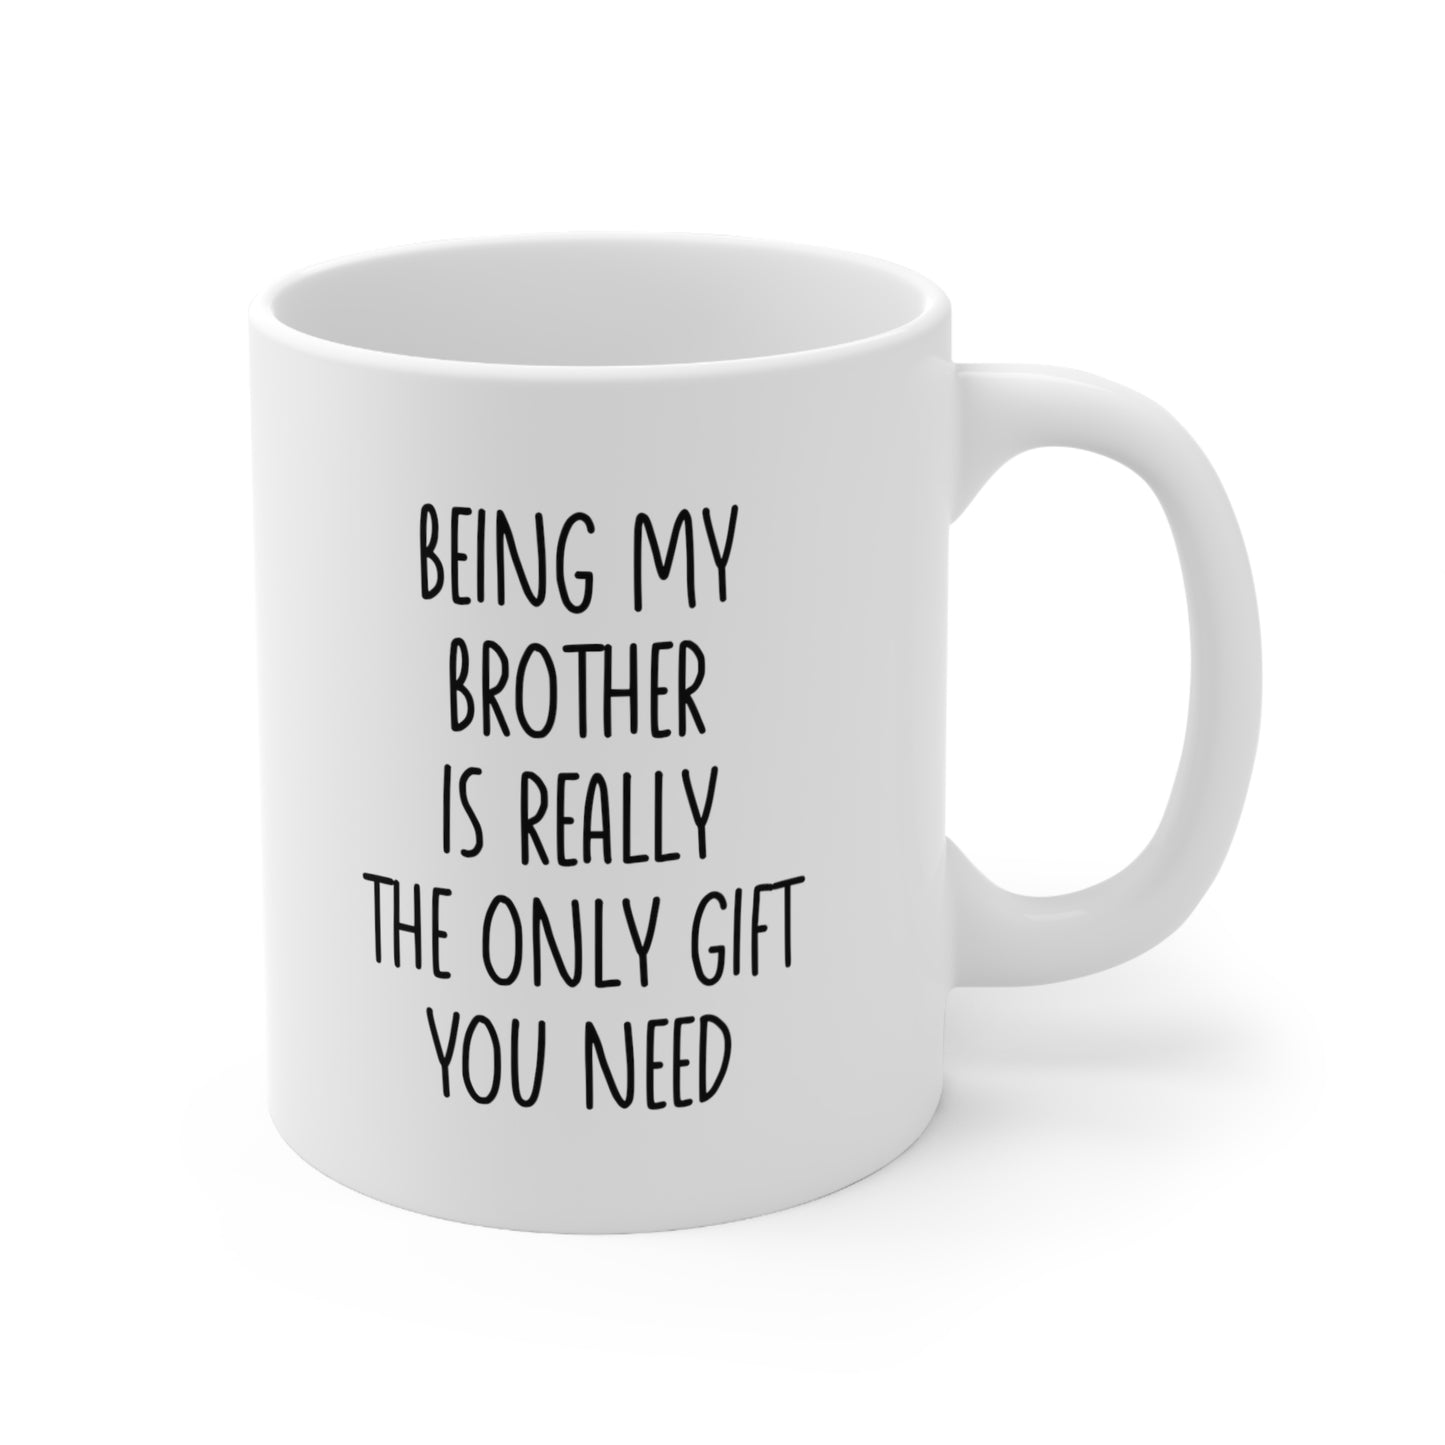 Being My Brother is Really the Only Gift You Need Coffee Mug 11oz